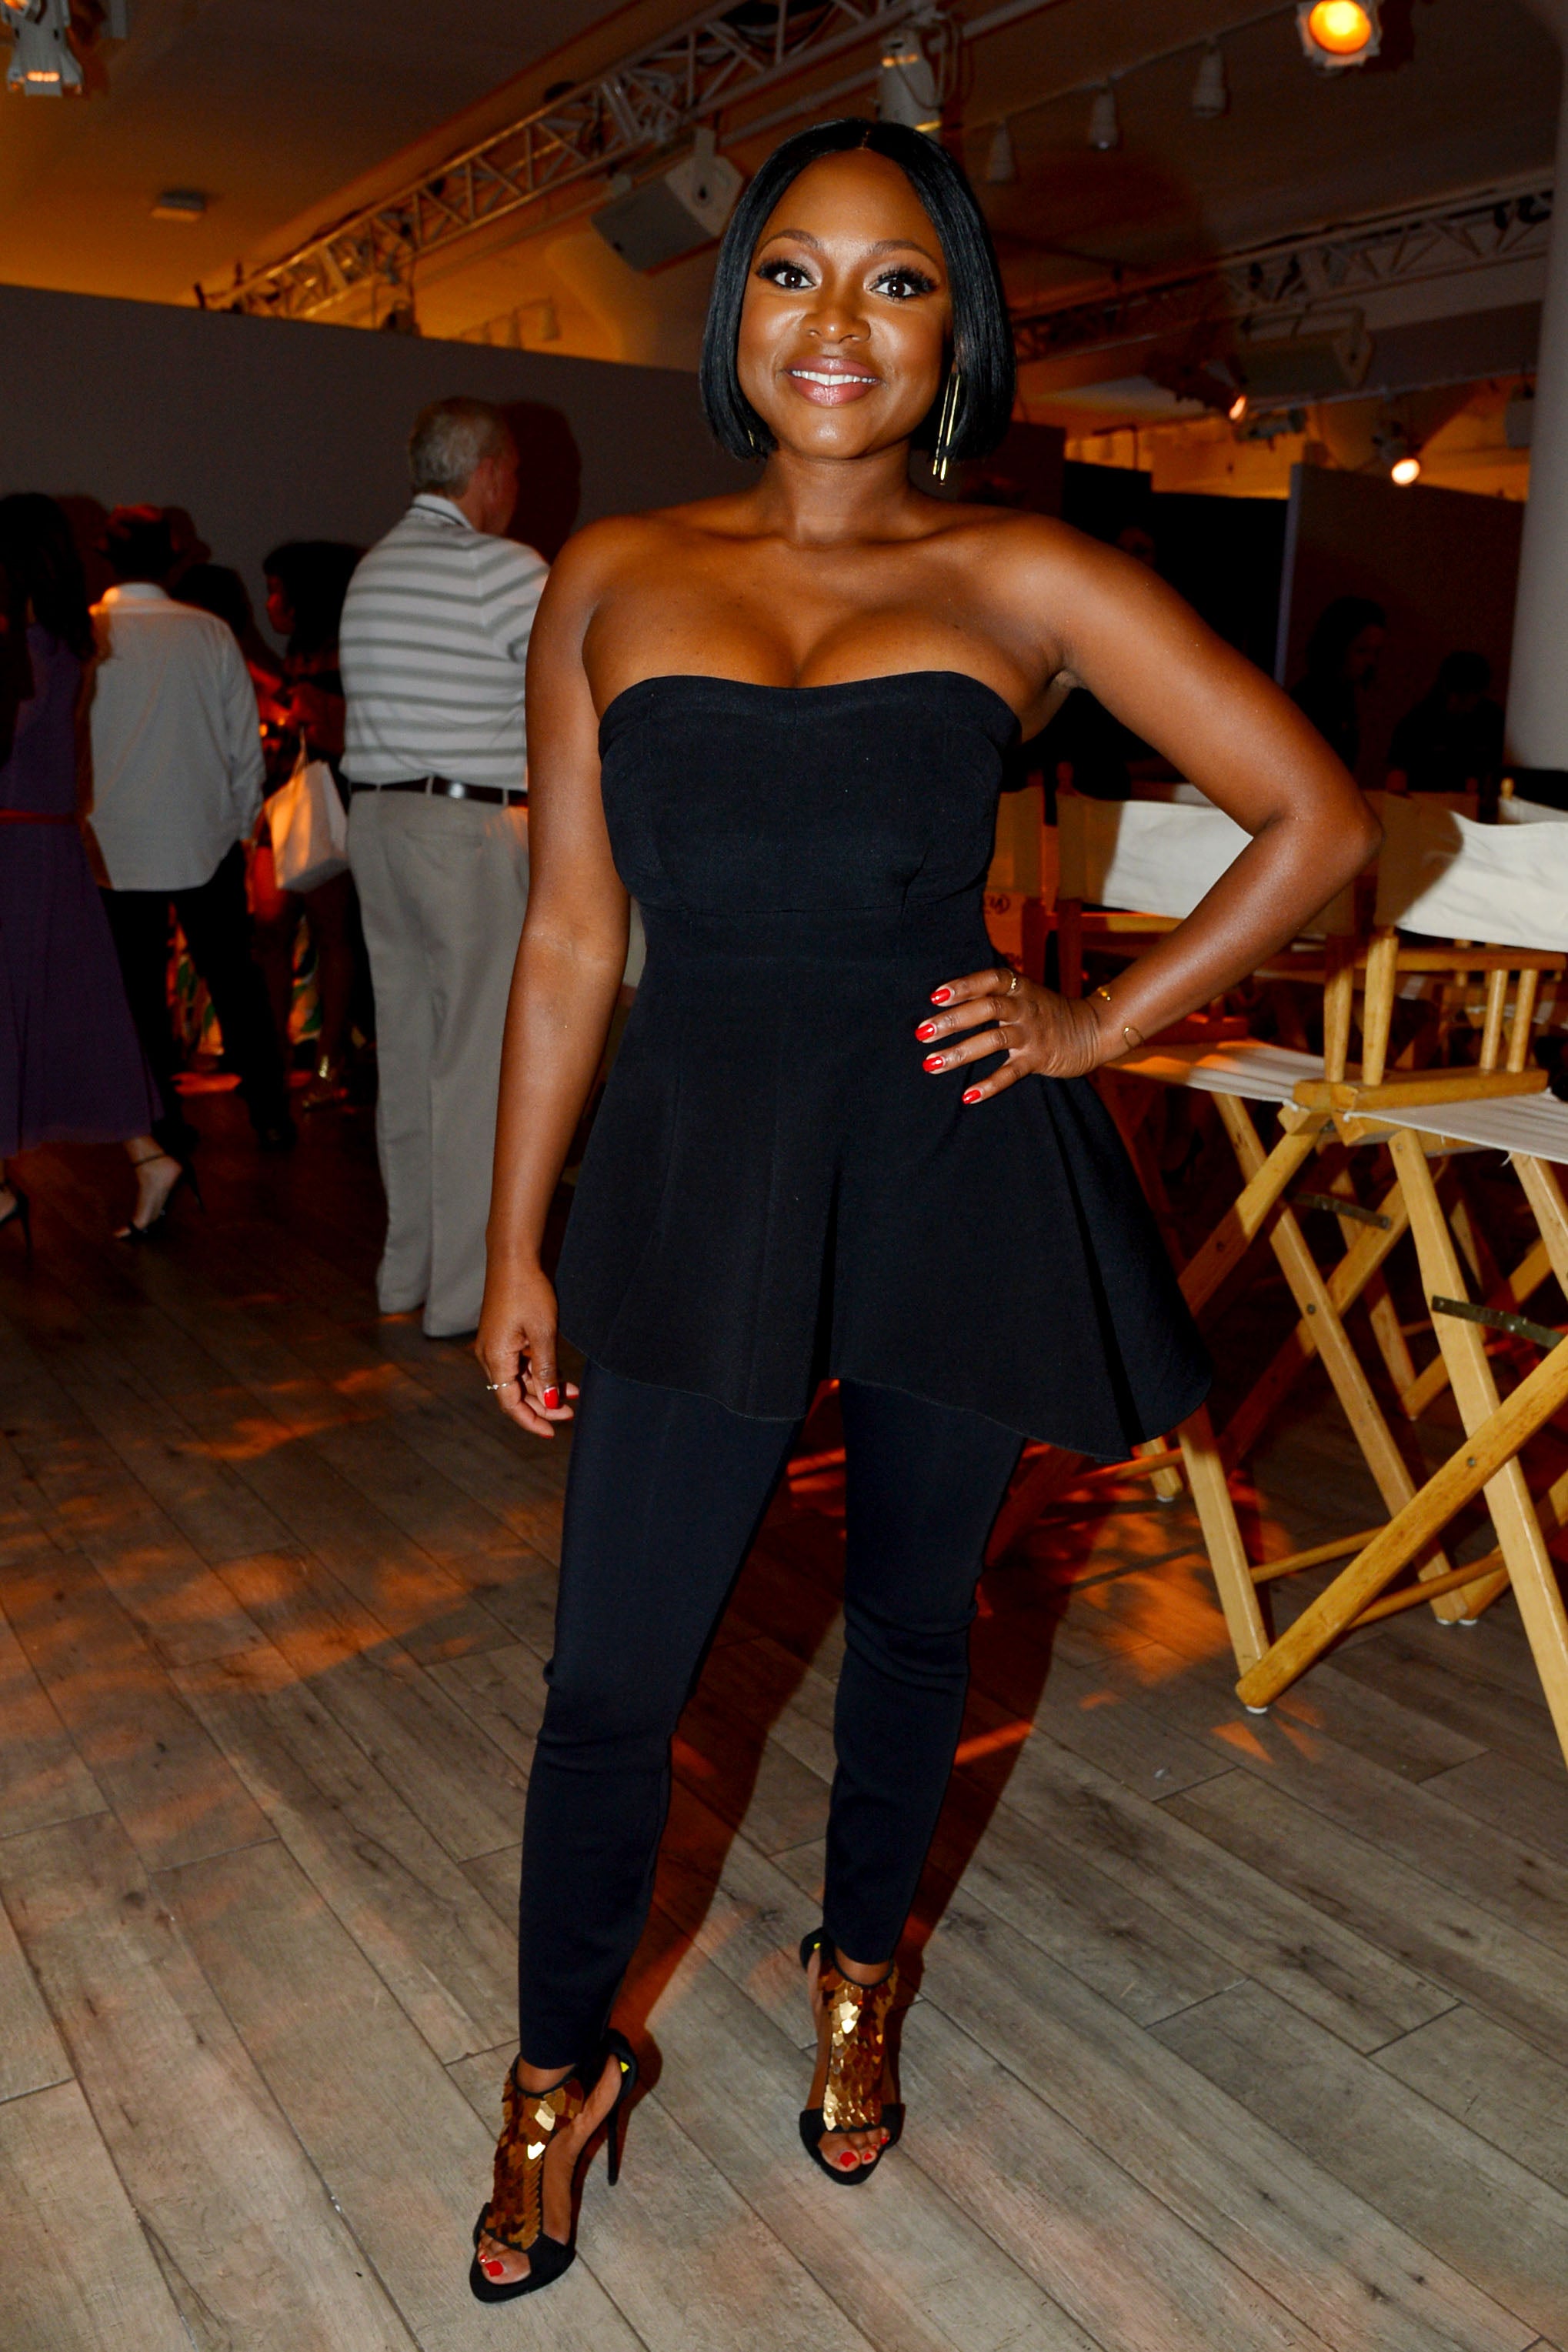 Serena Williams' Fashion Show and After Party Will Give You So Much Life
